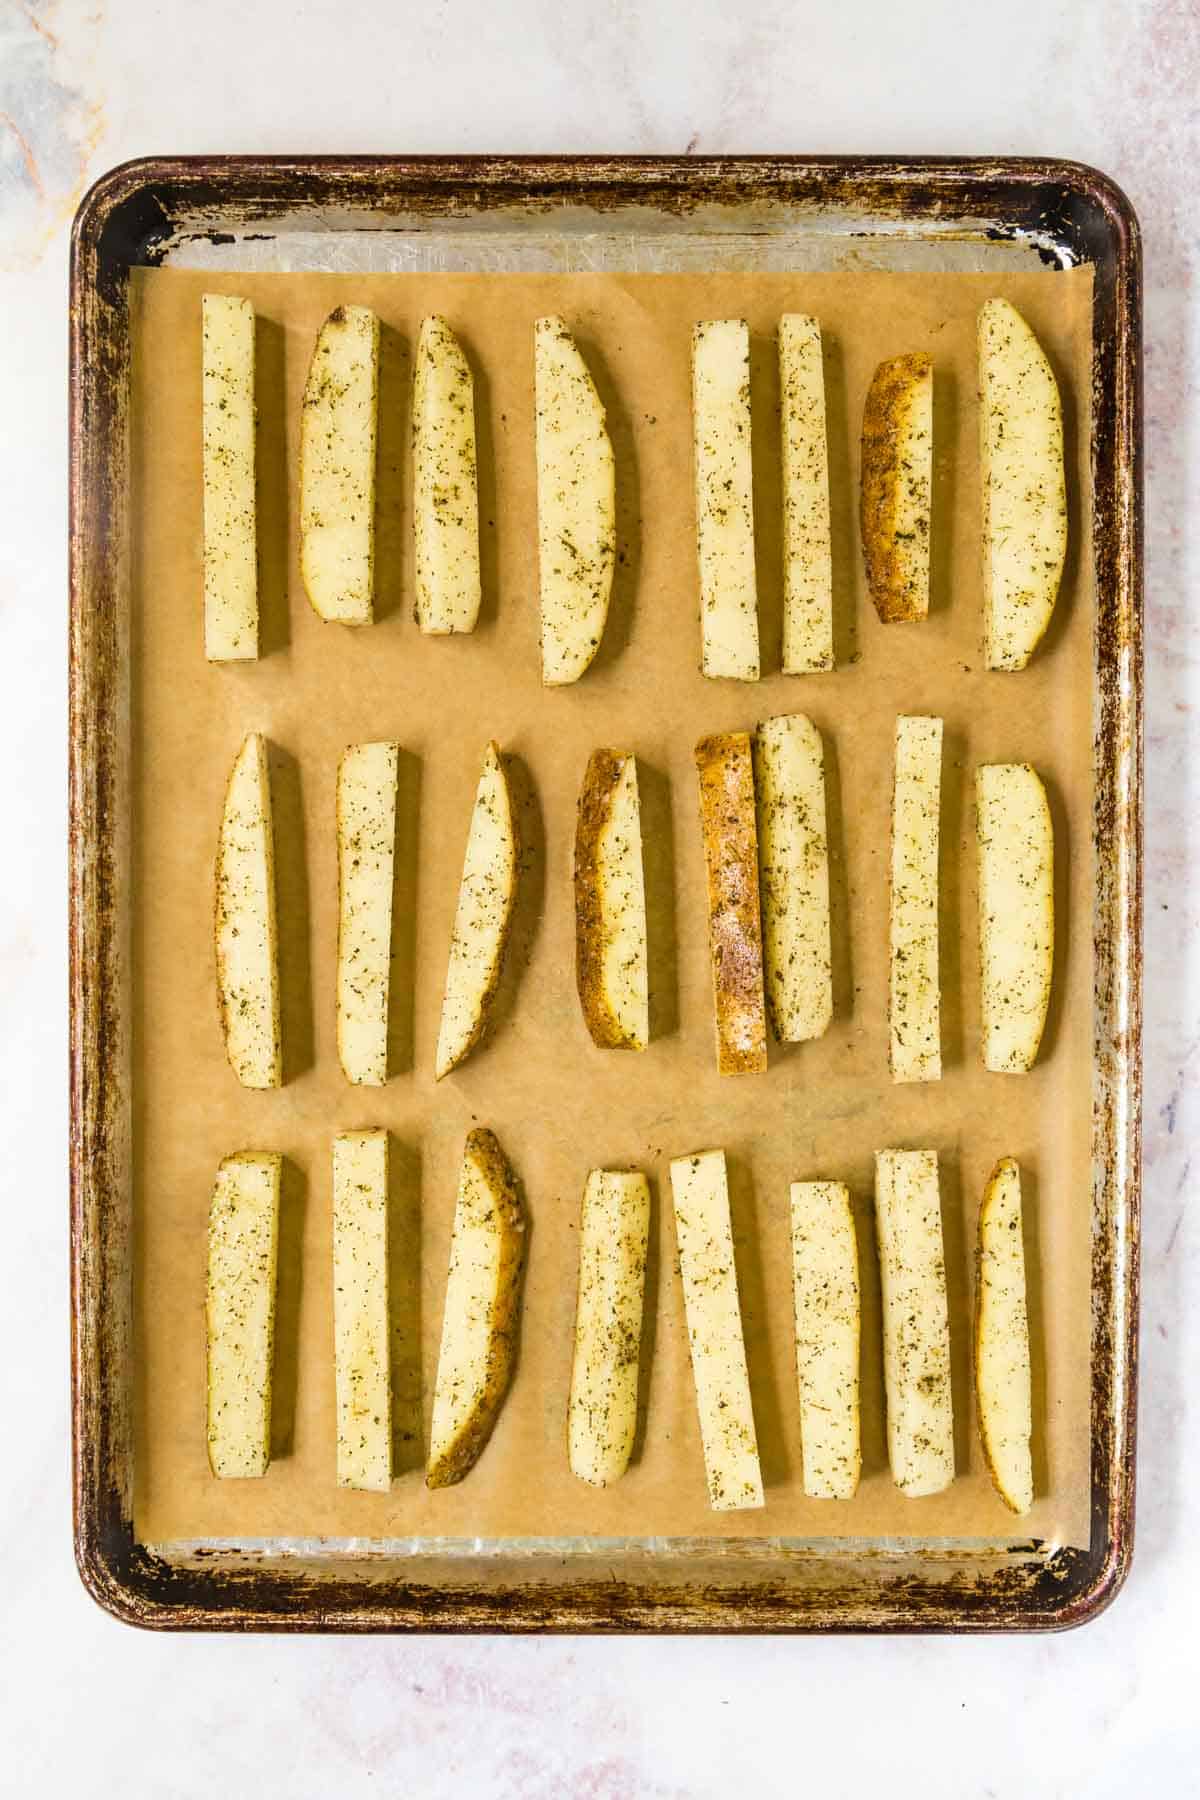 Three rows of seasoned french fries on a piece of parchment paper over a metal baking sheet